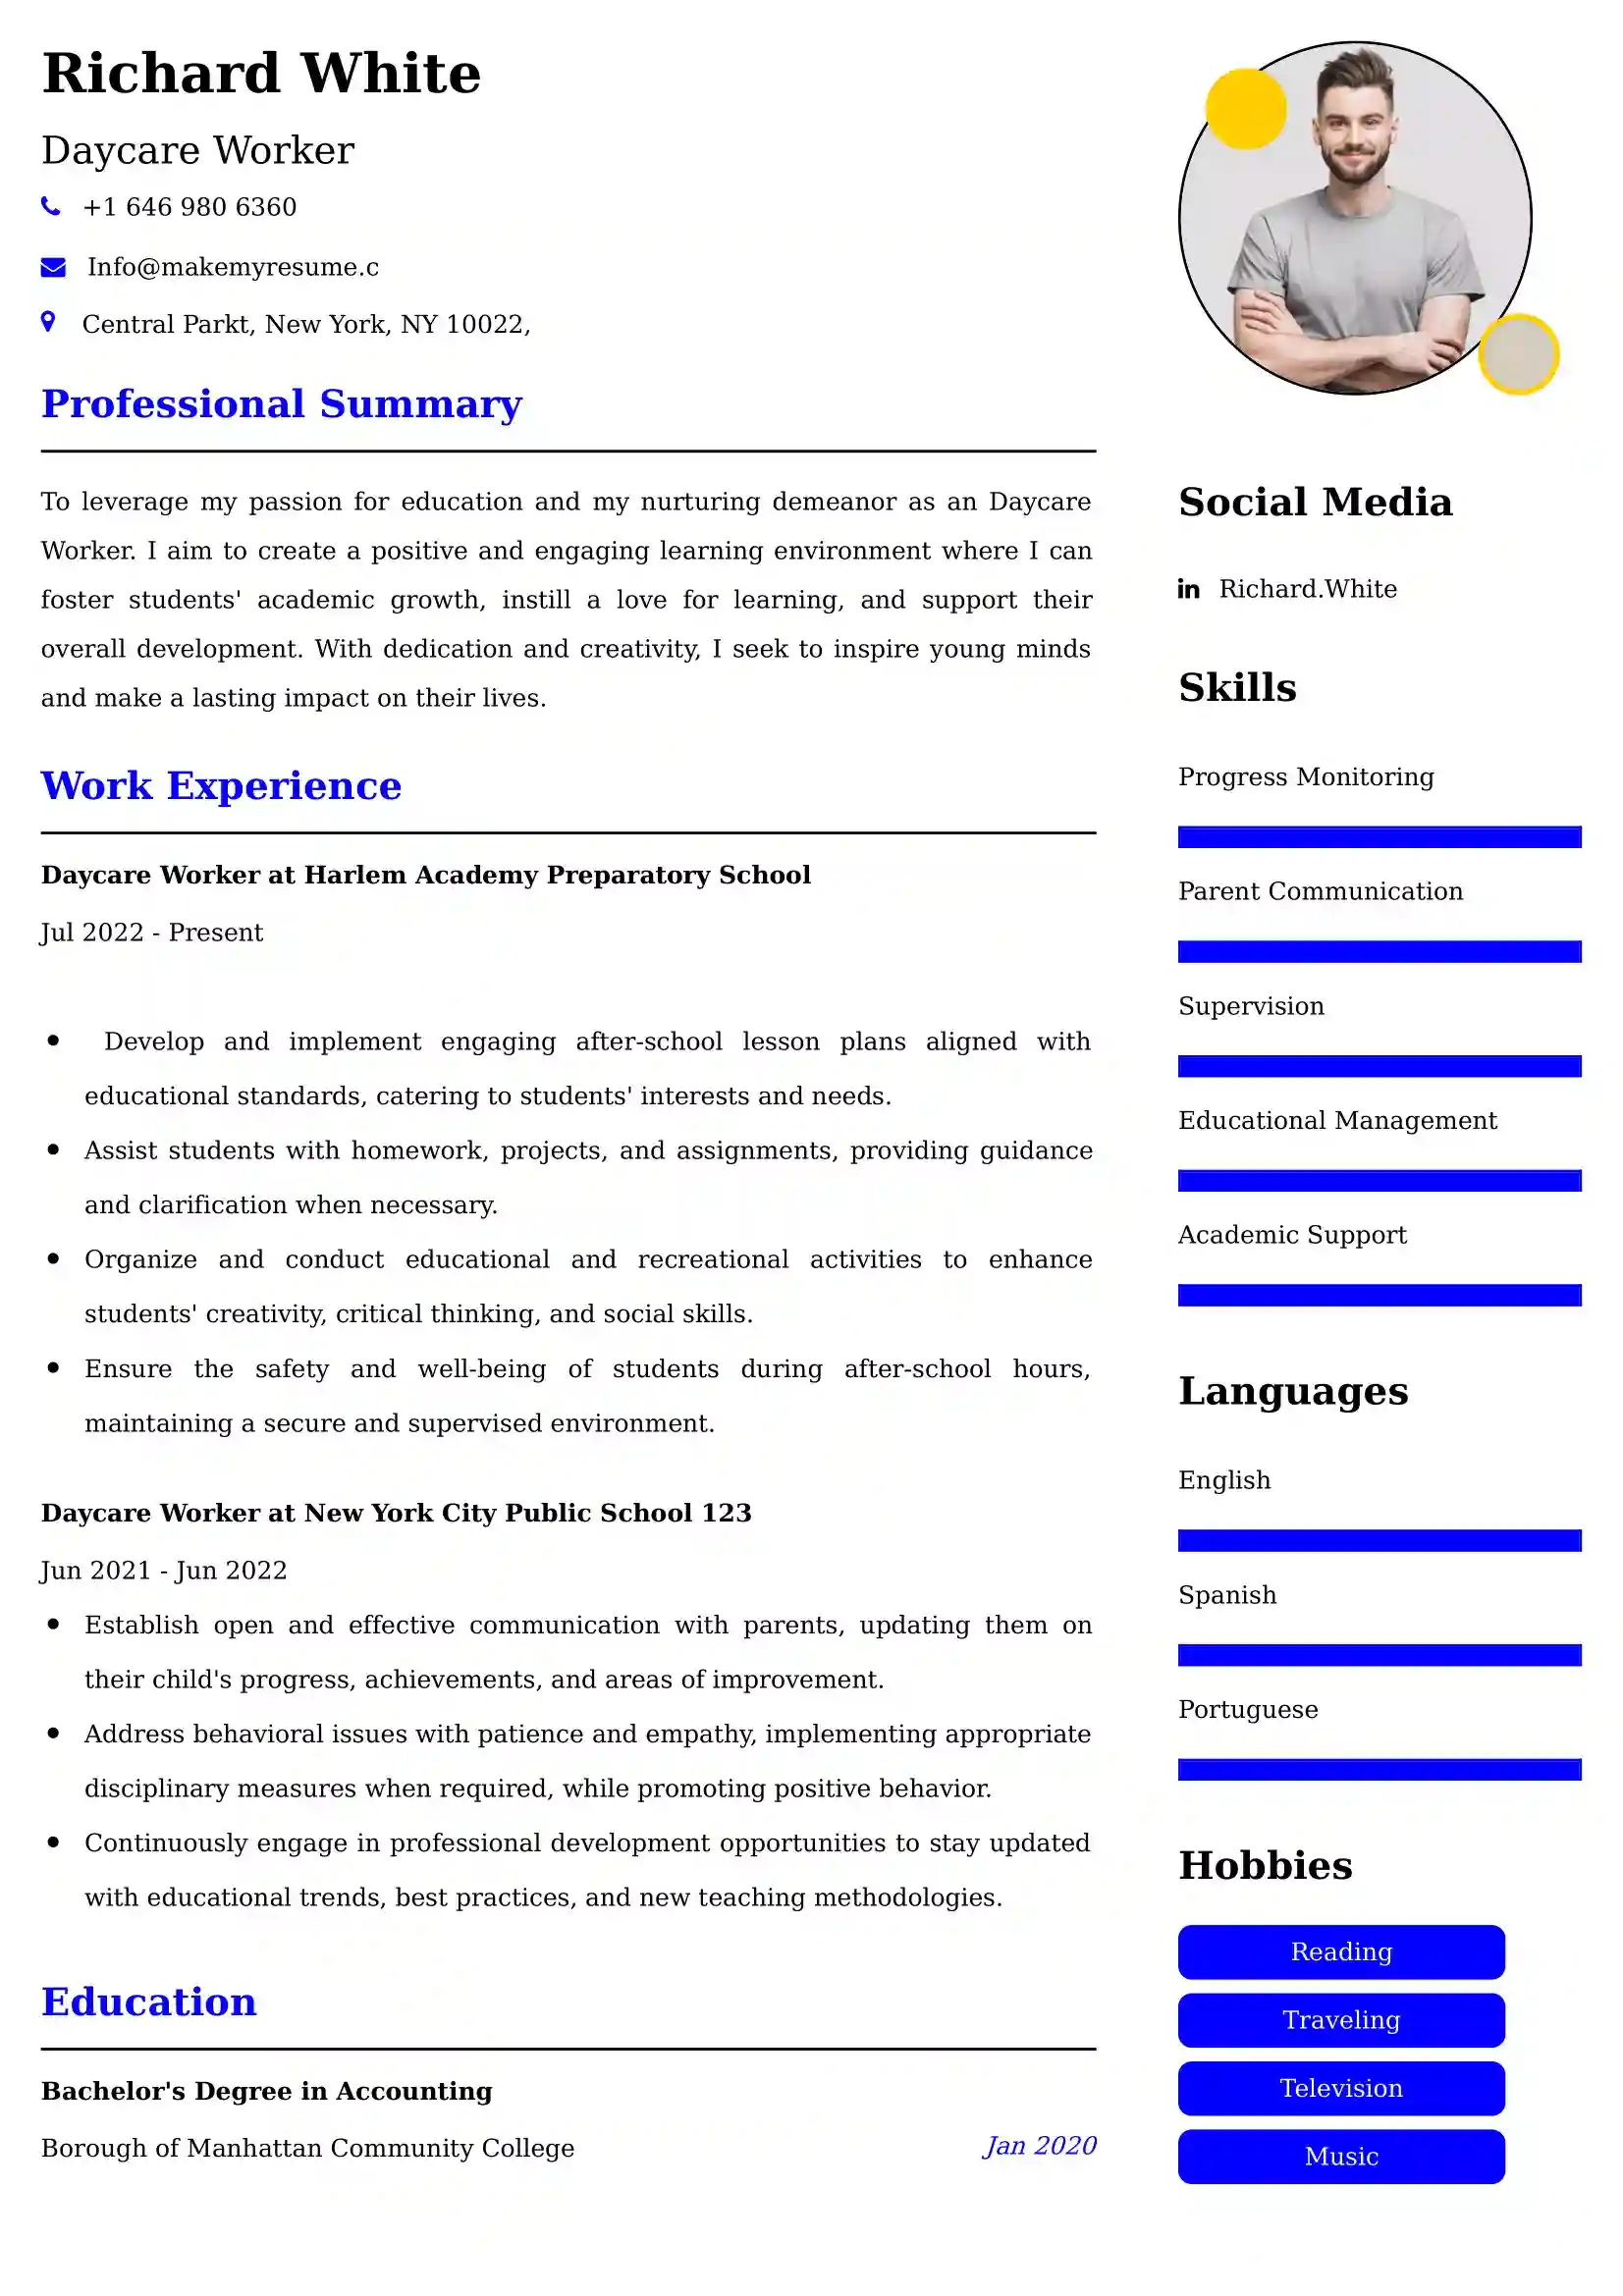 Daycare Worker Resume Examples - UAE Format and Tips.